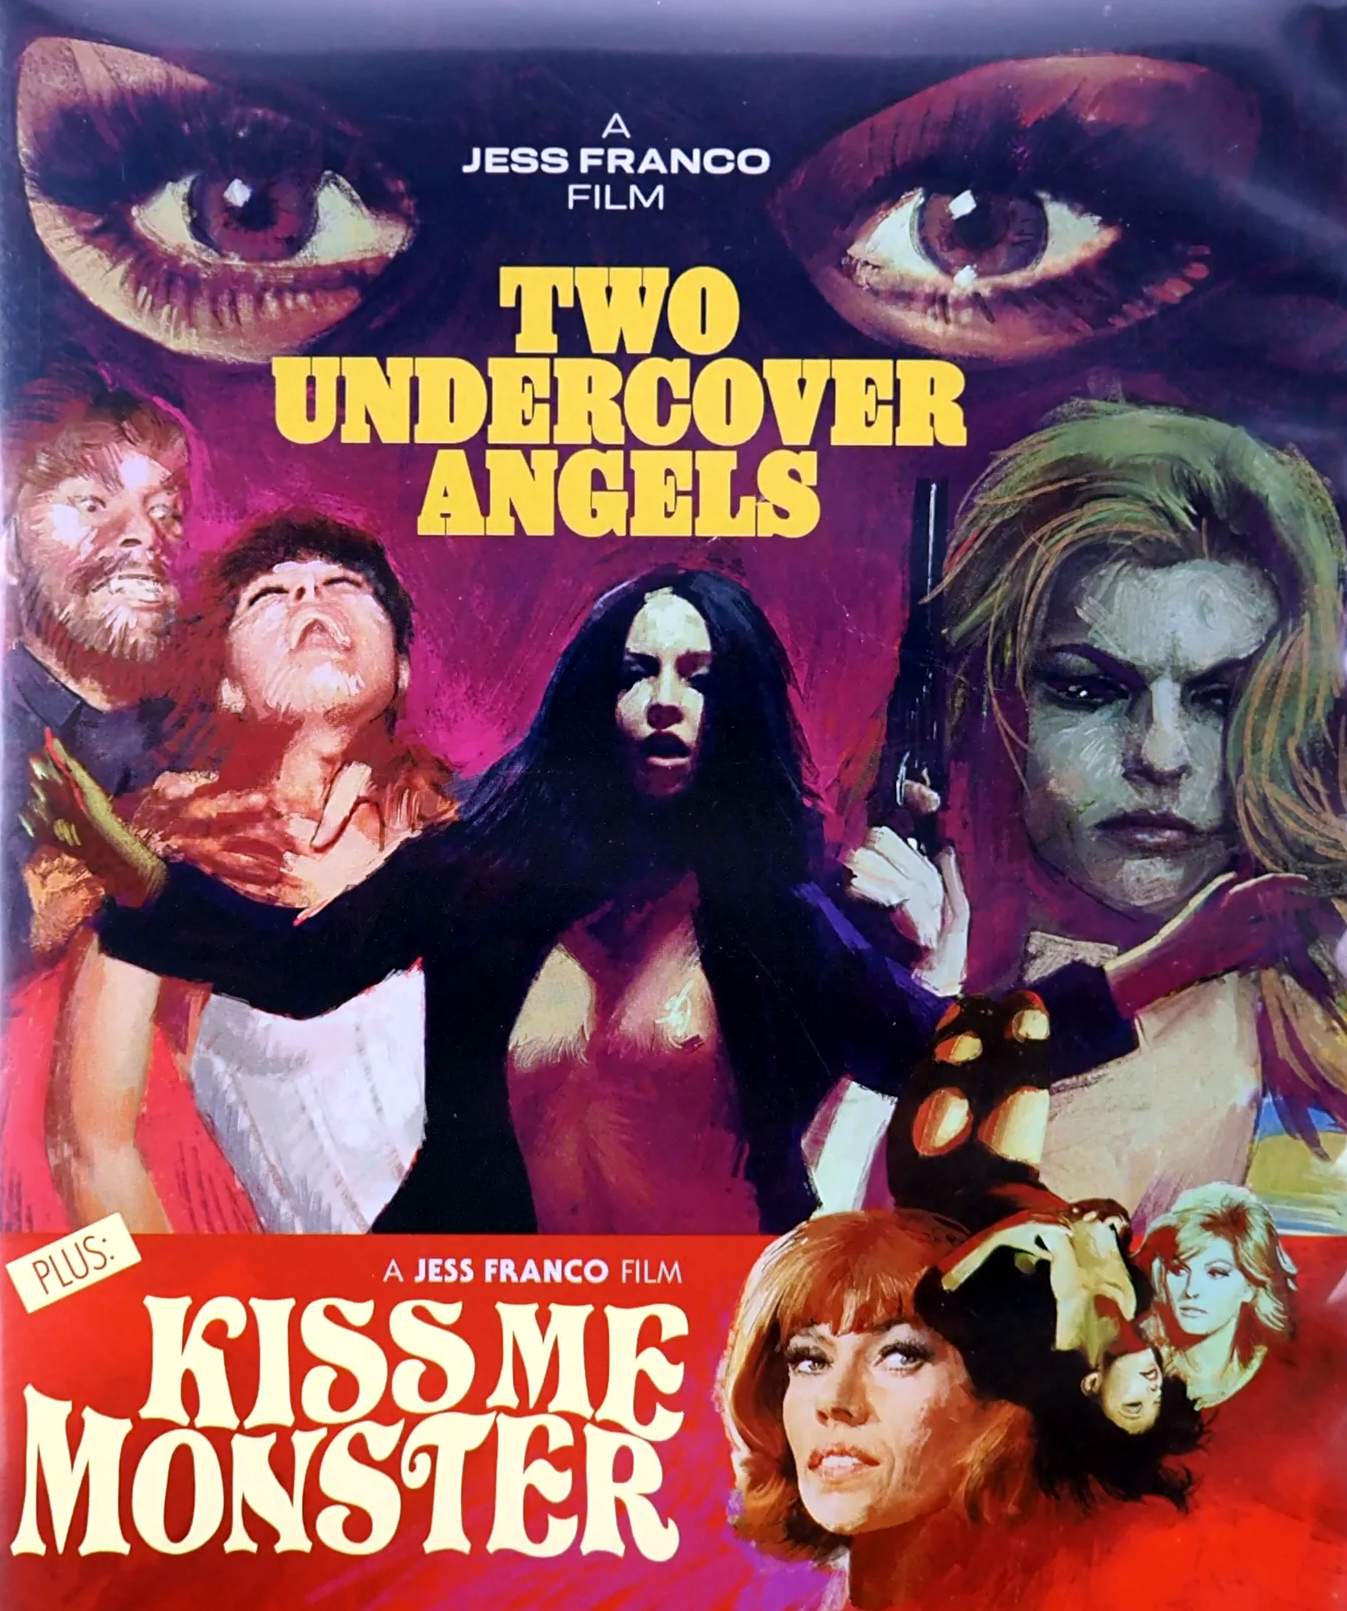 TWO UNDERCOVER ANGELS / KISS ME MONSTER - BLU-RAY